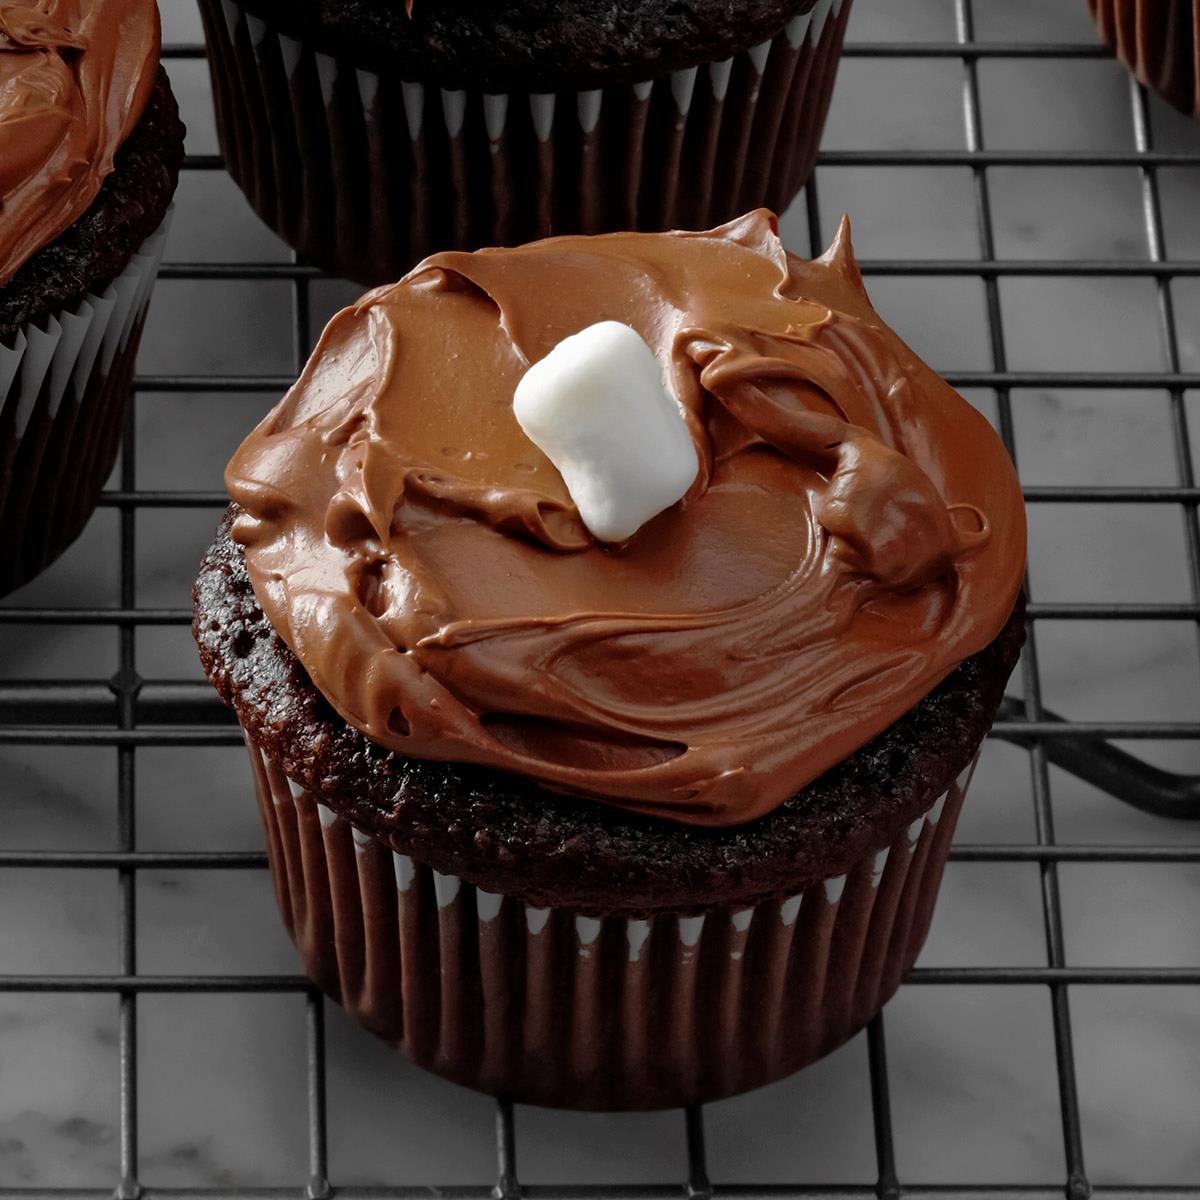 Mexican Hot Chocolate Cupcakes Exps Rc22 270377 Dr 12 13 4b